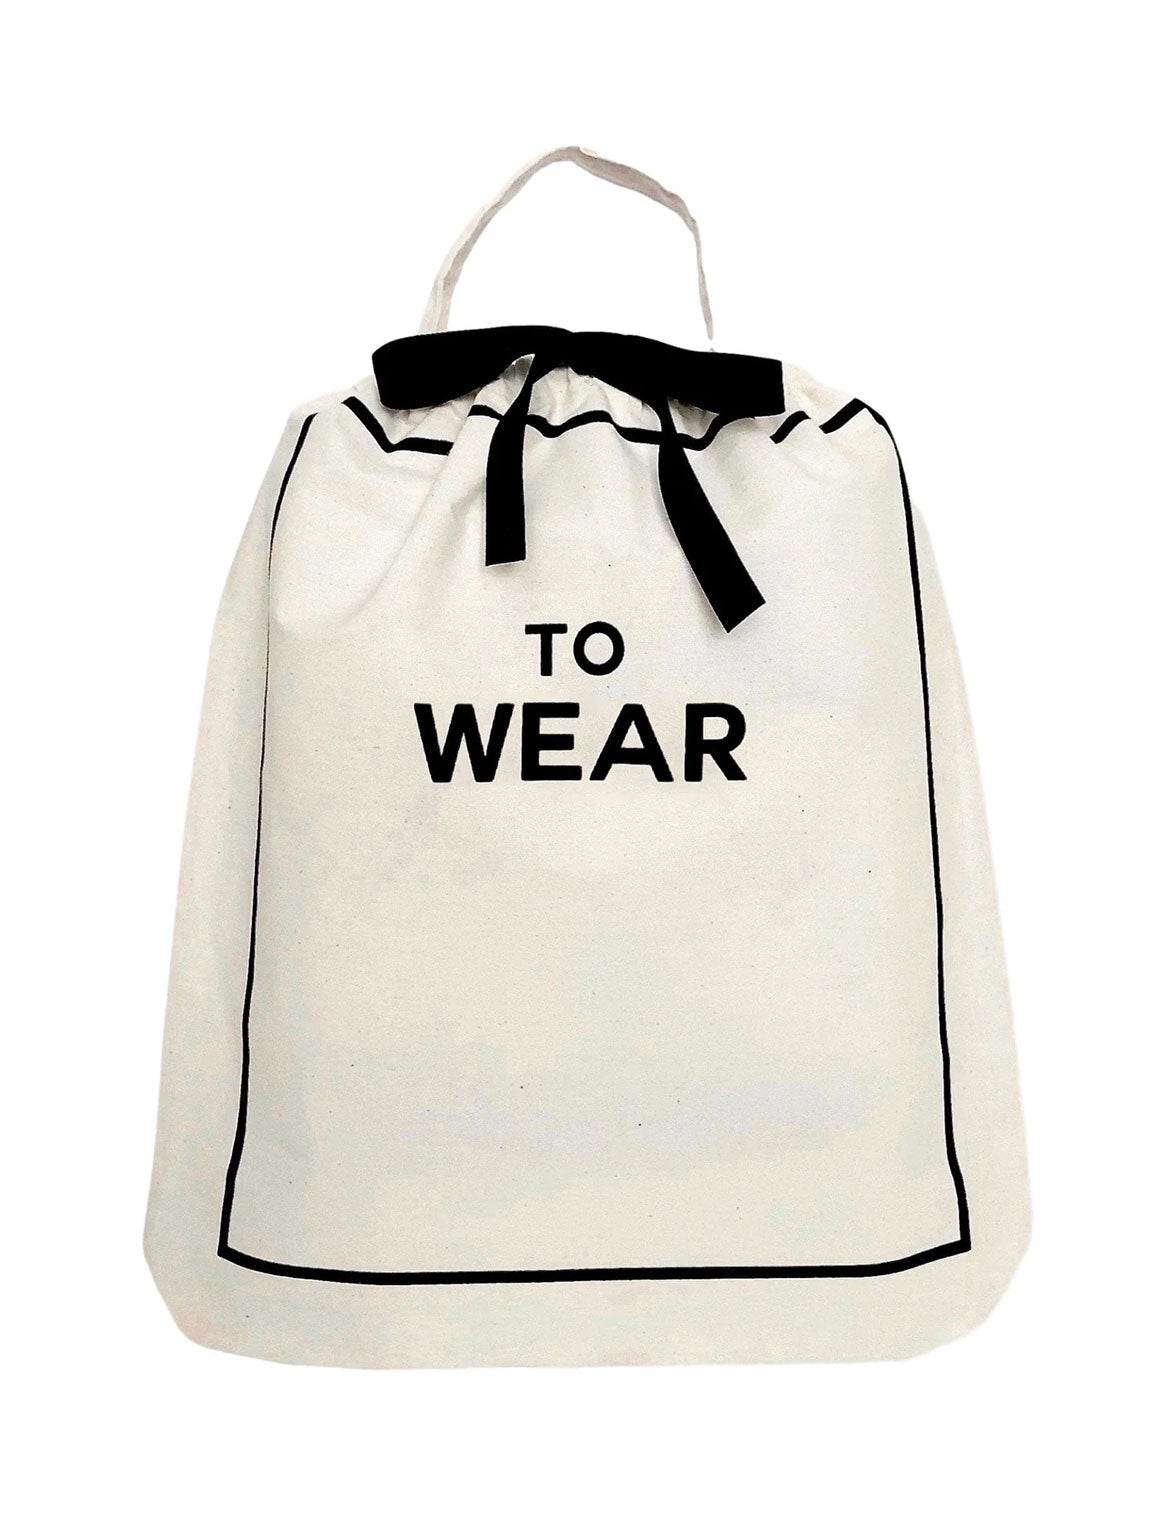 "To Wear" Outfit Bag